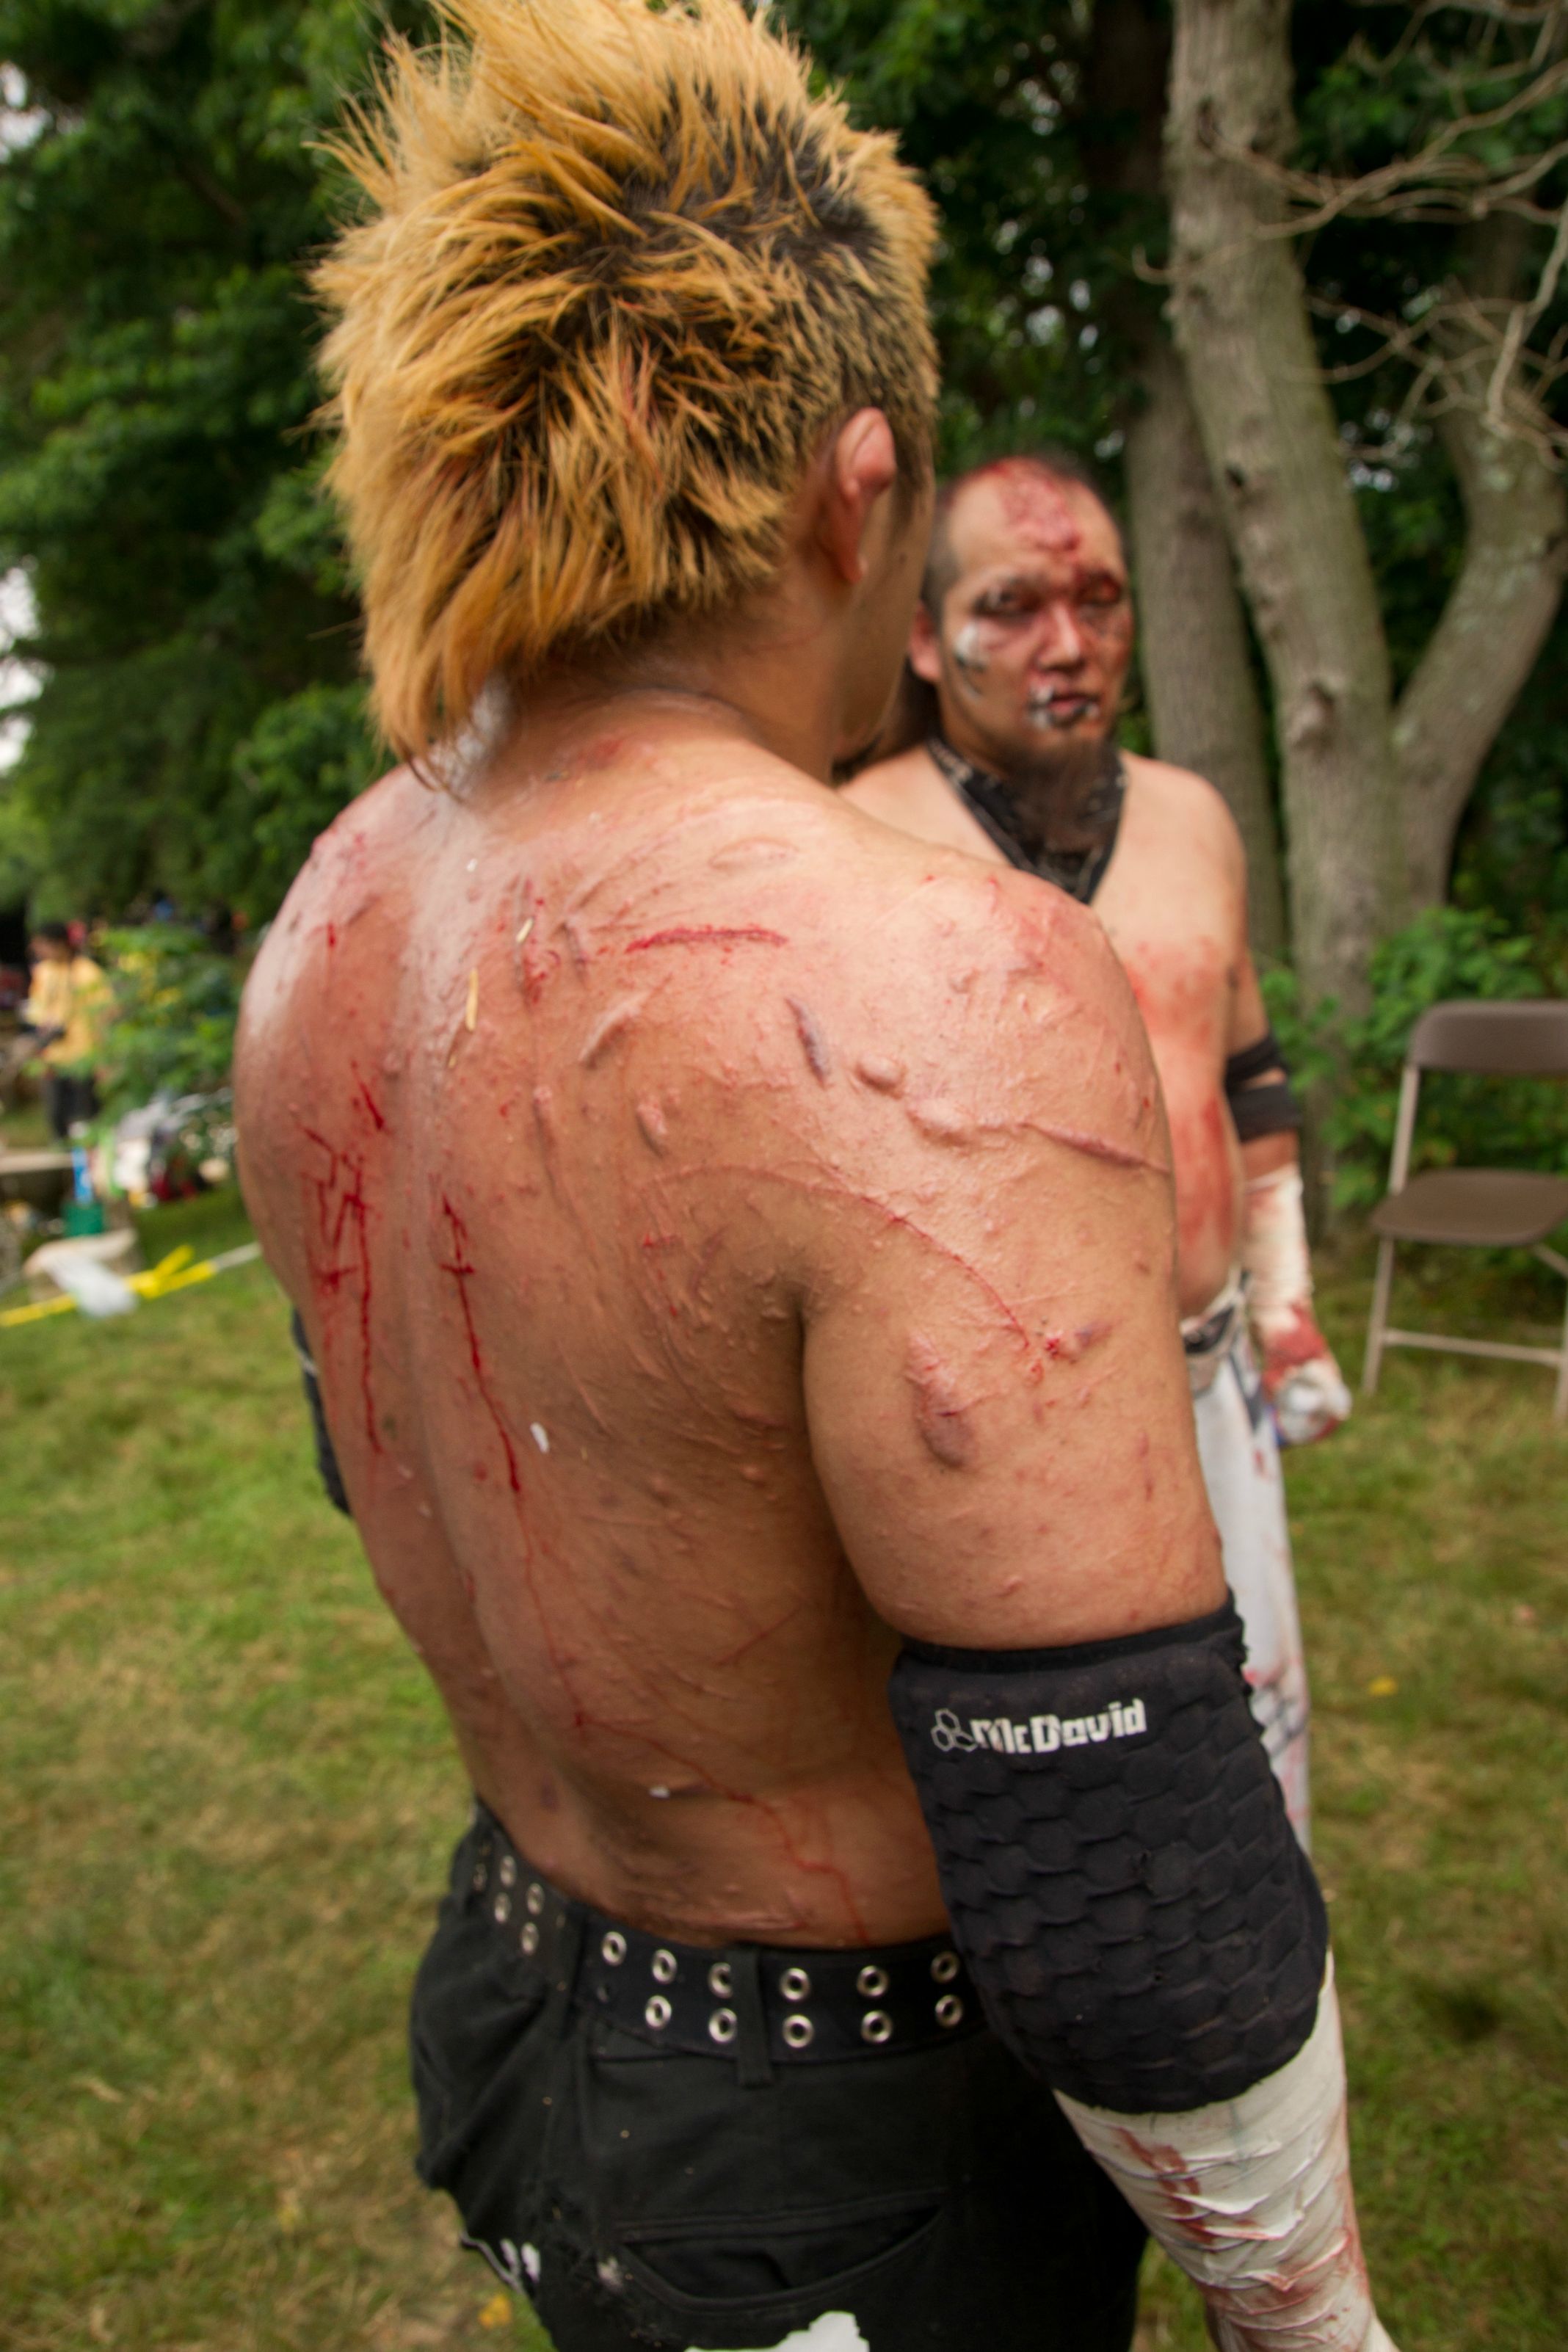 The scarred up back of a Japanese Death Match wrestler